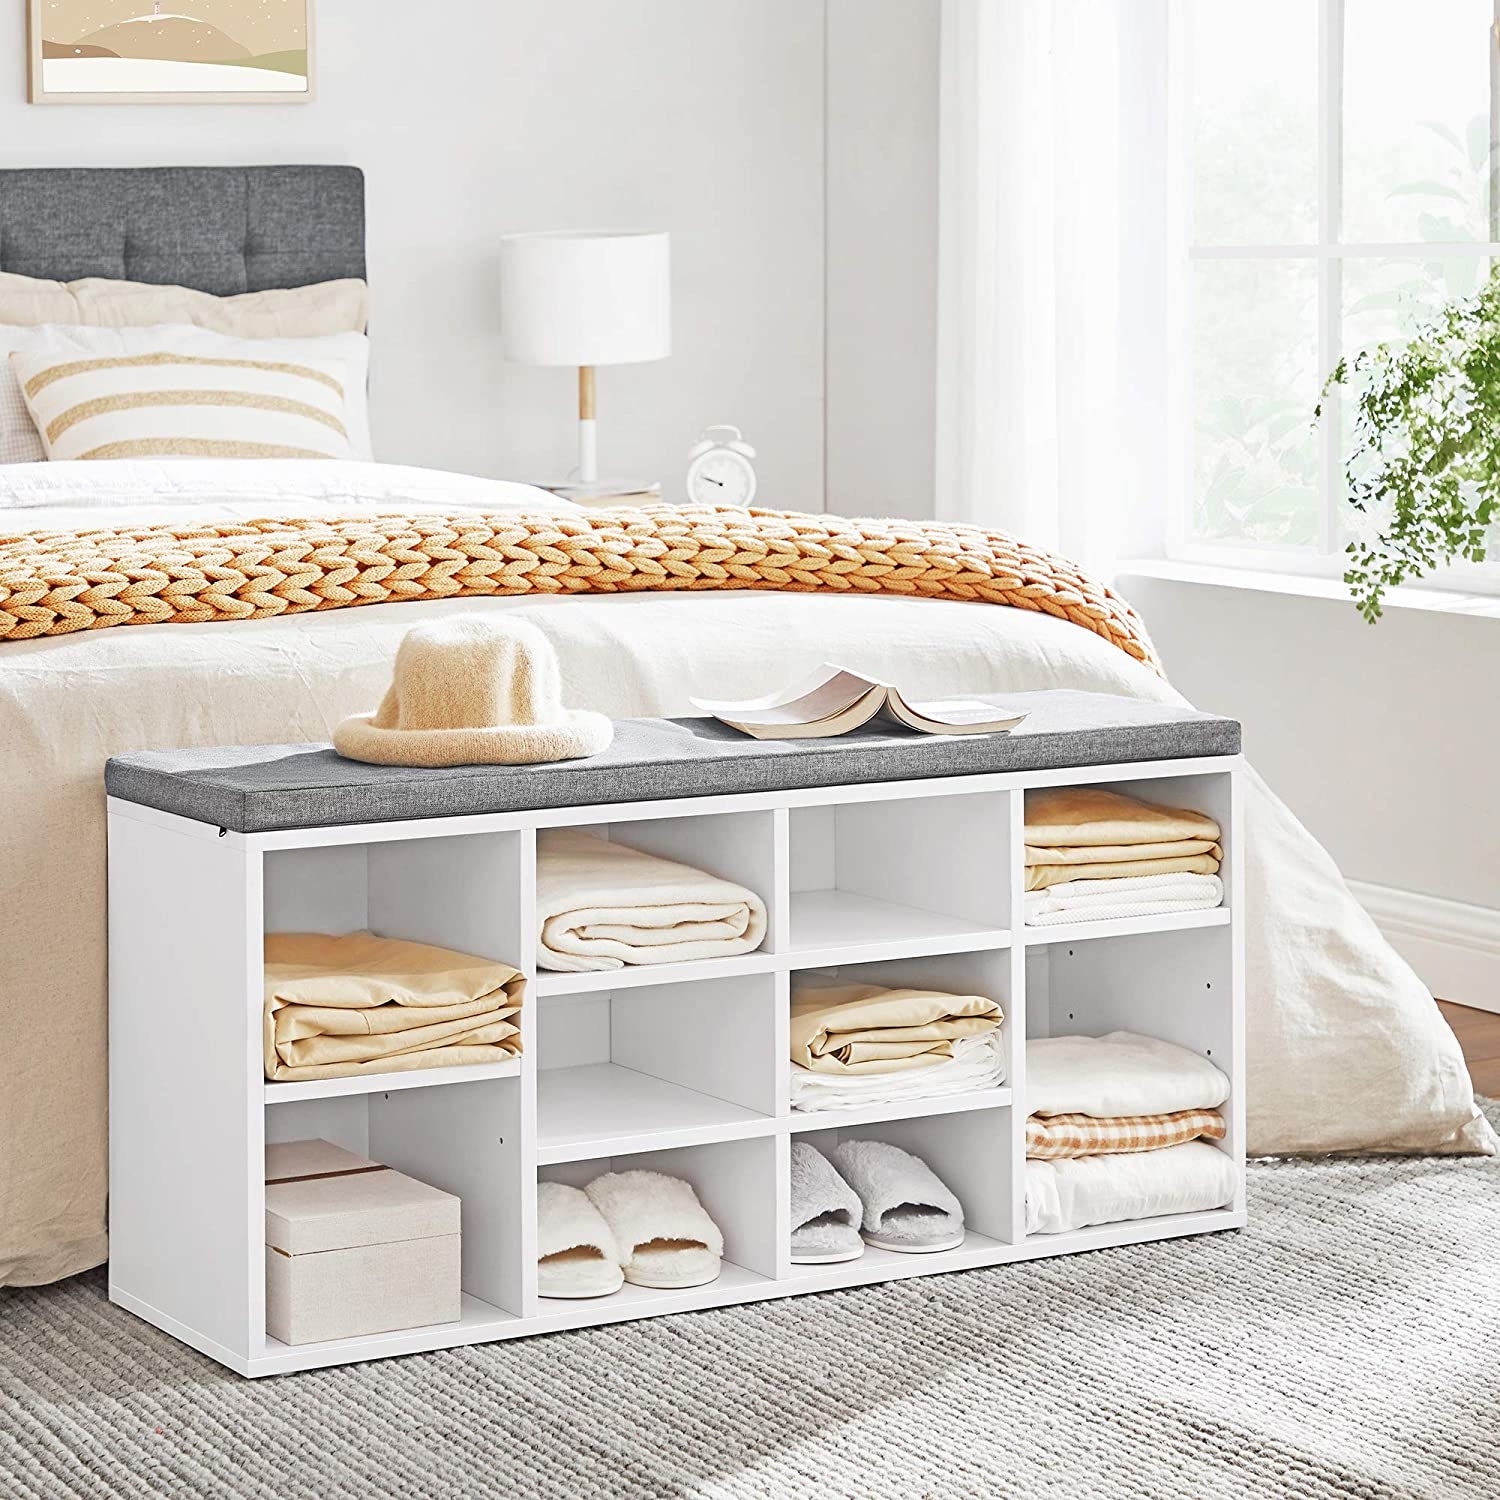 21 Bedroom Organization Products To Clear Your Space